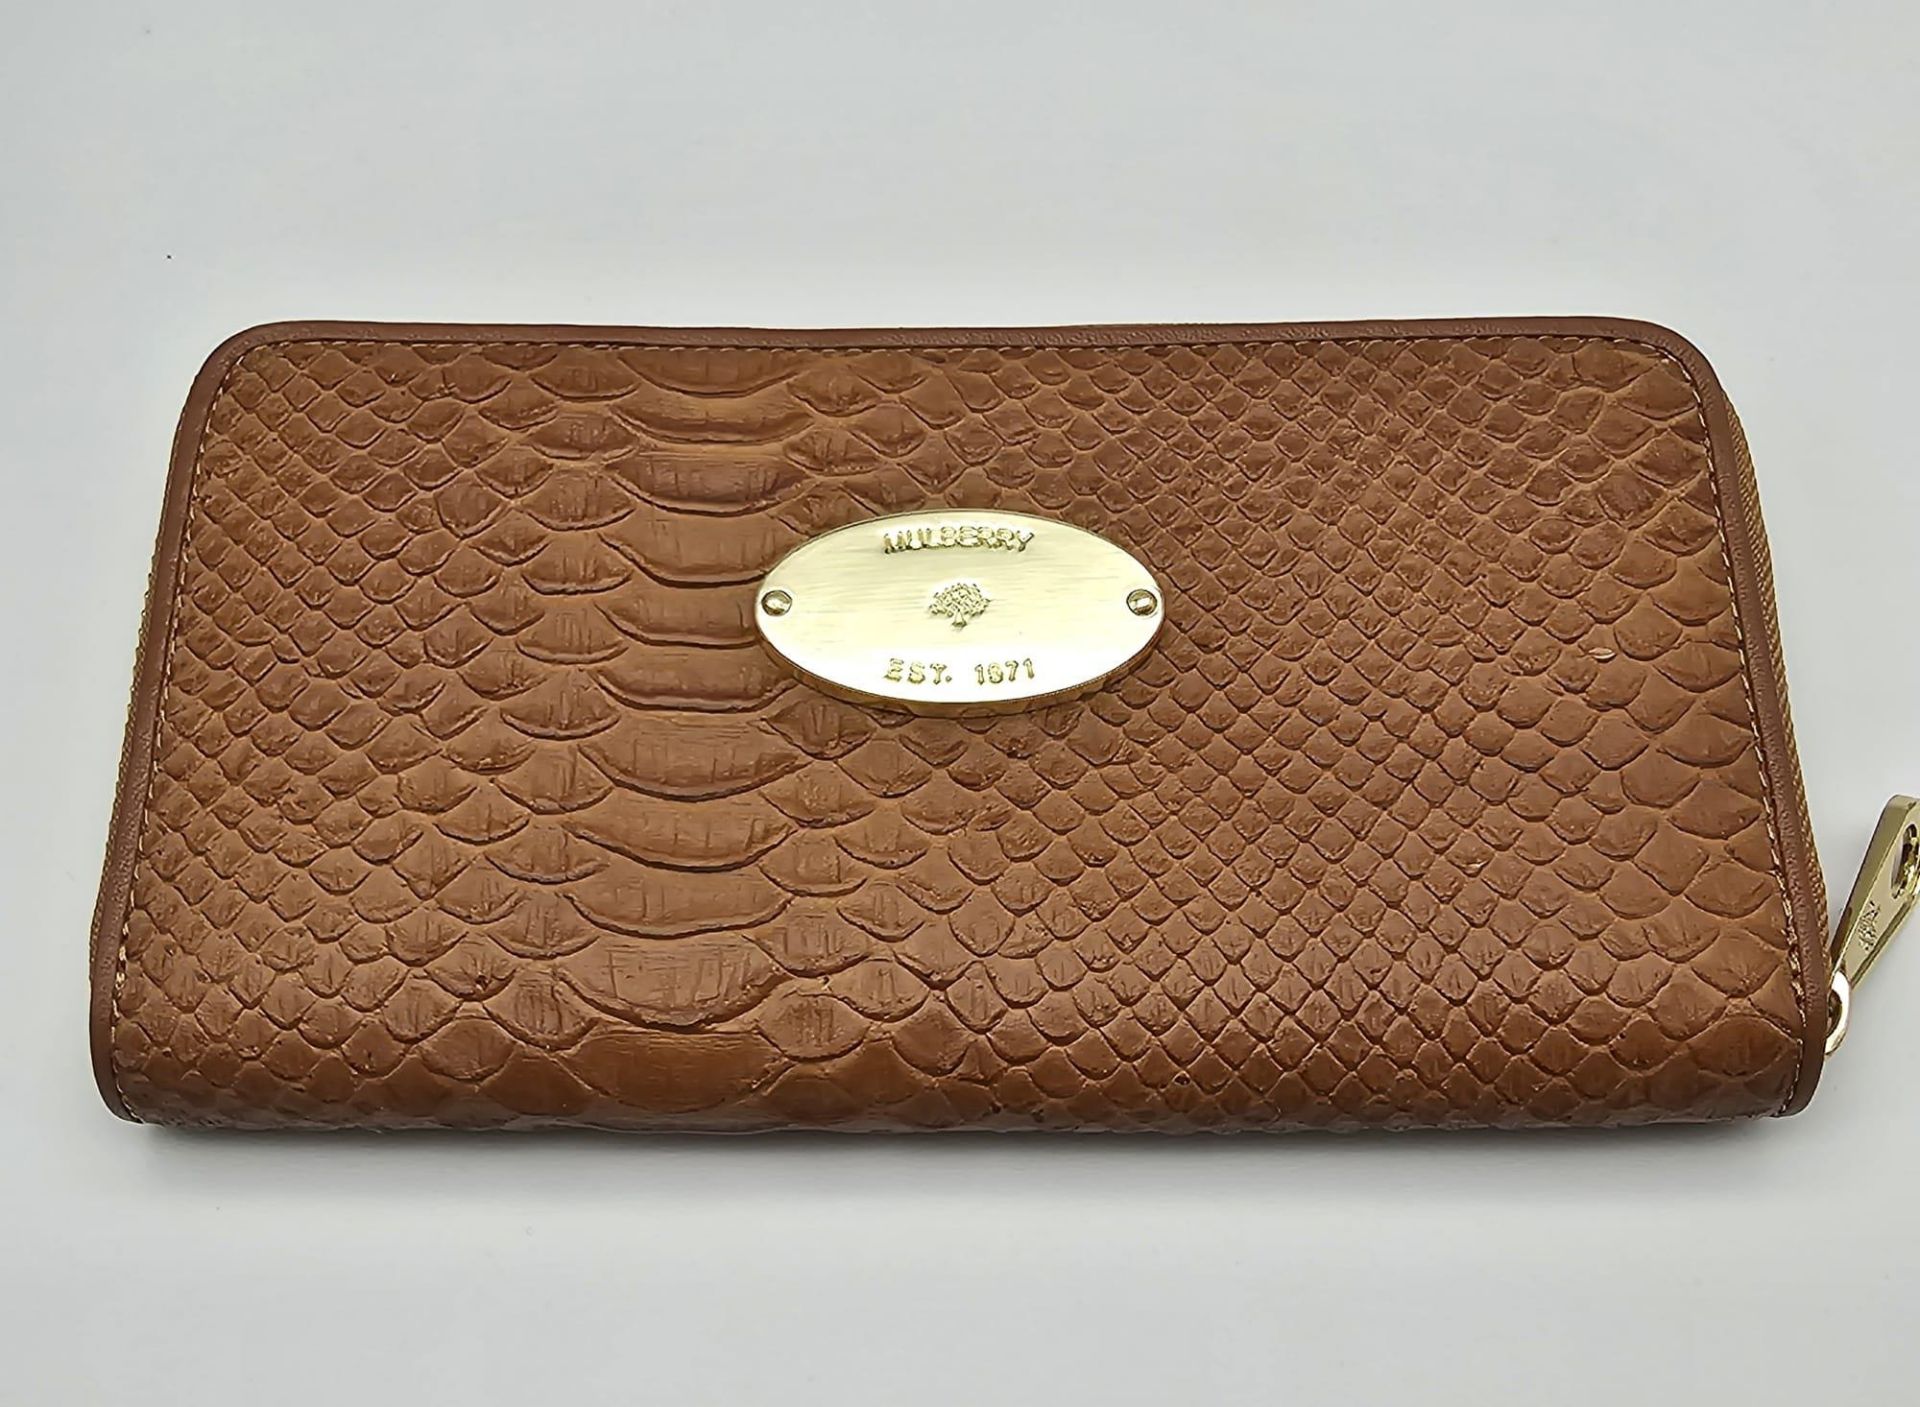 A Mulberry Brown Leather Clutch Bag/Wallet. Textured leather exterior with an inner zipped - Bild 2 aus 9